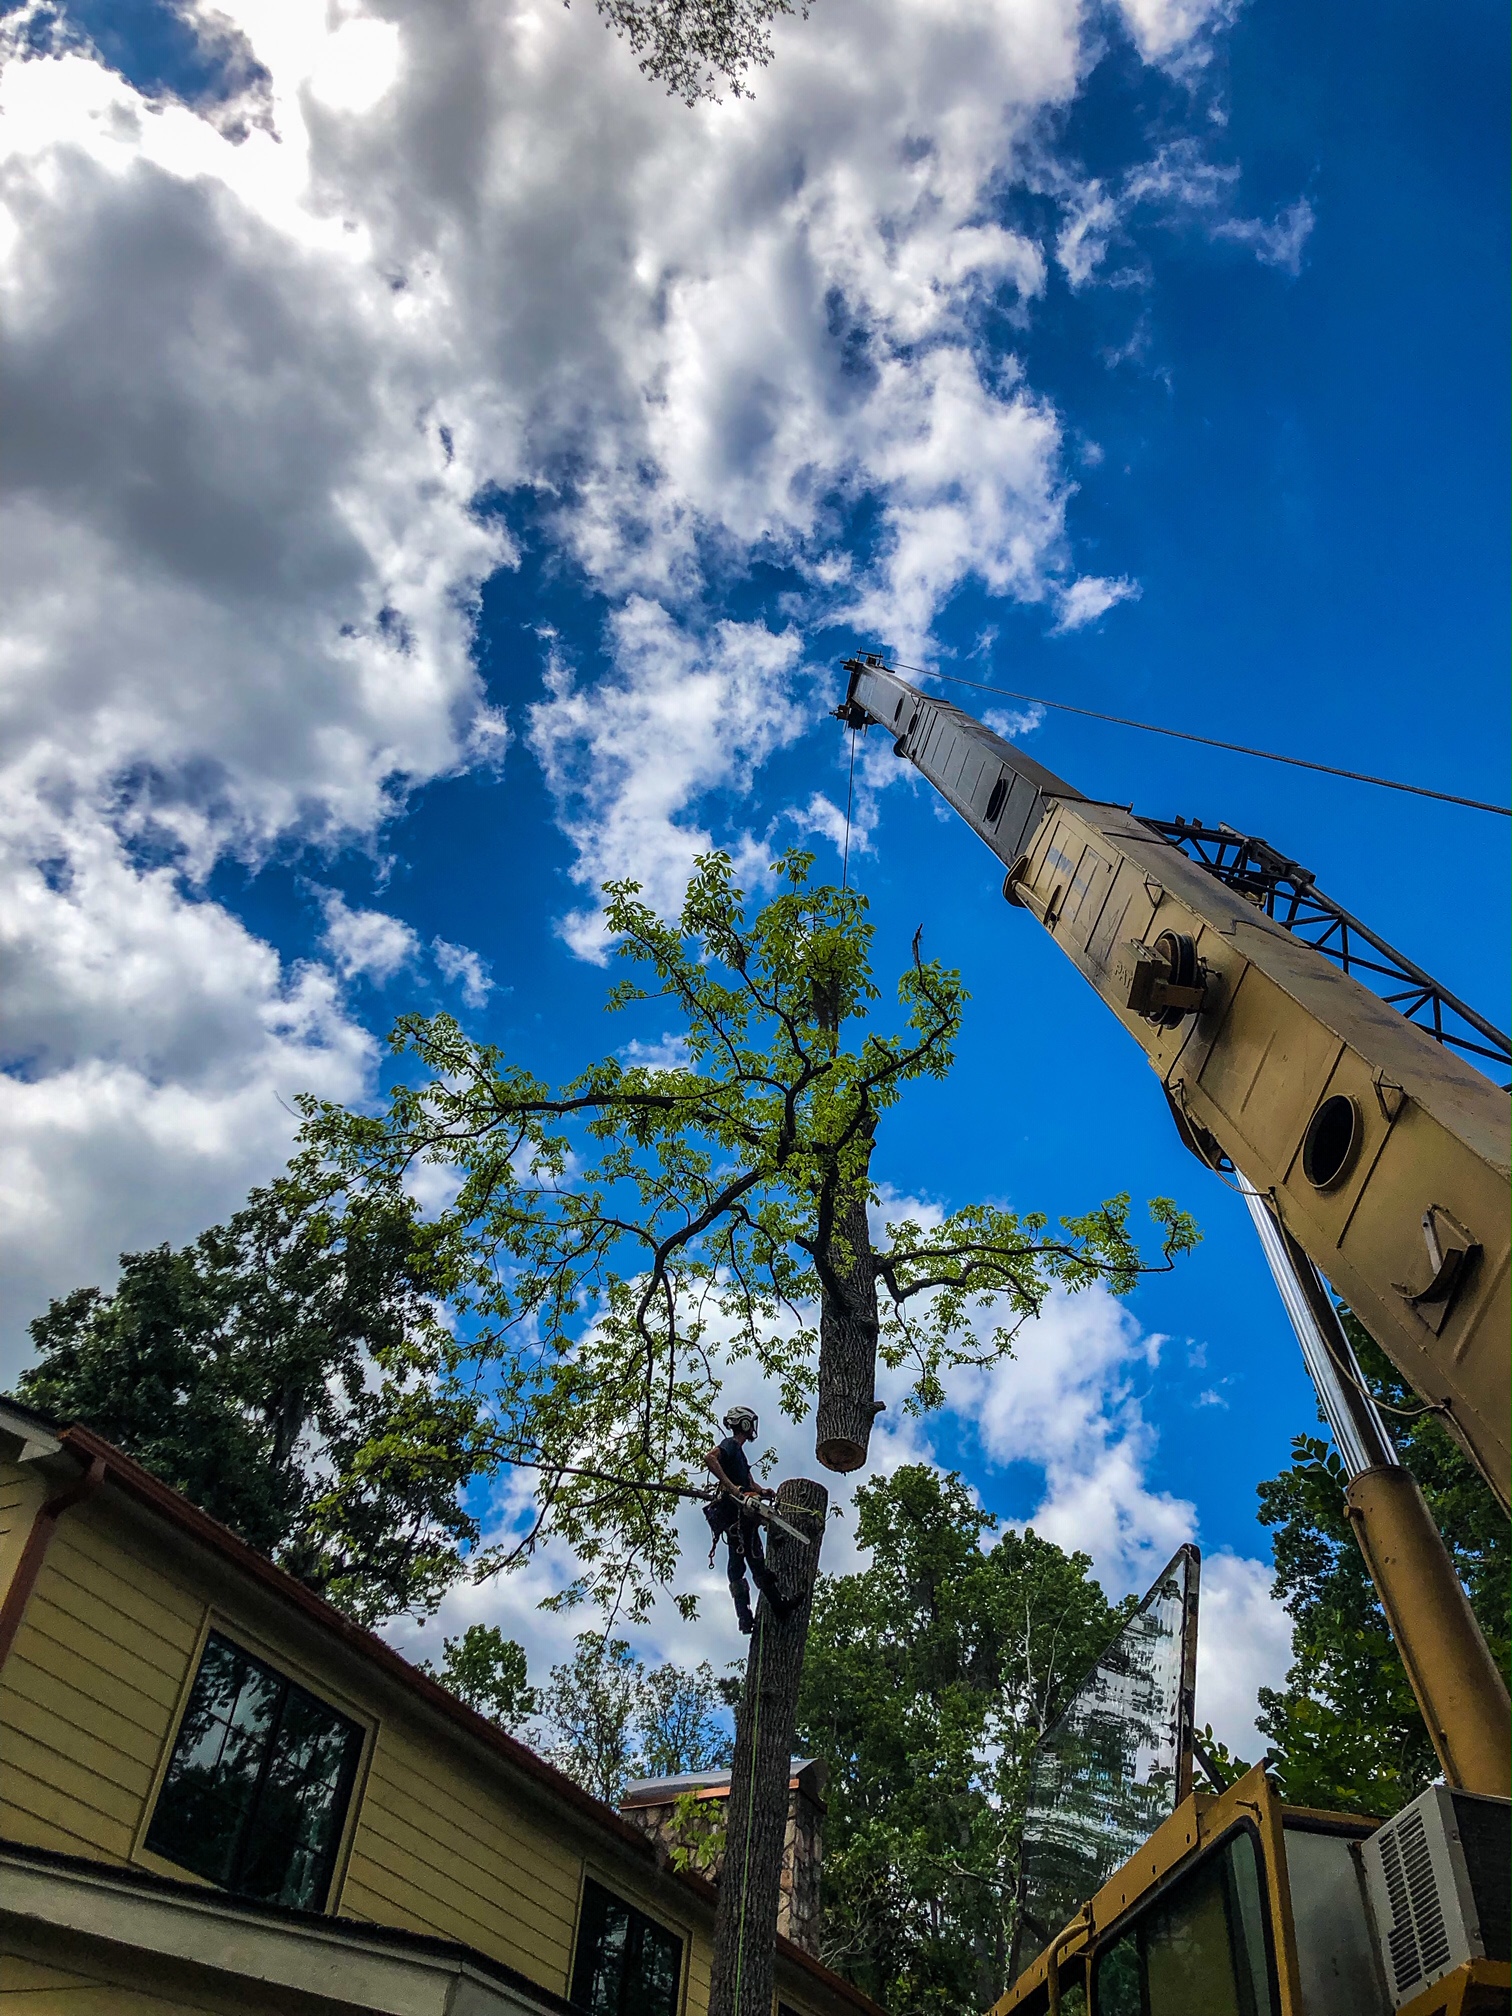 22 Ton ATC pics a tree apart making life safer and easier for this tree  climber in Tallahassee.